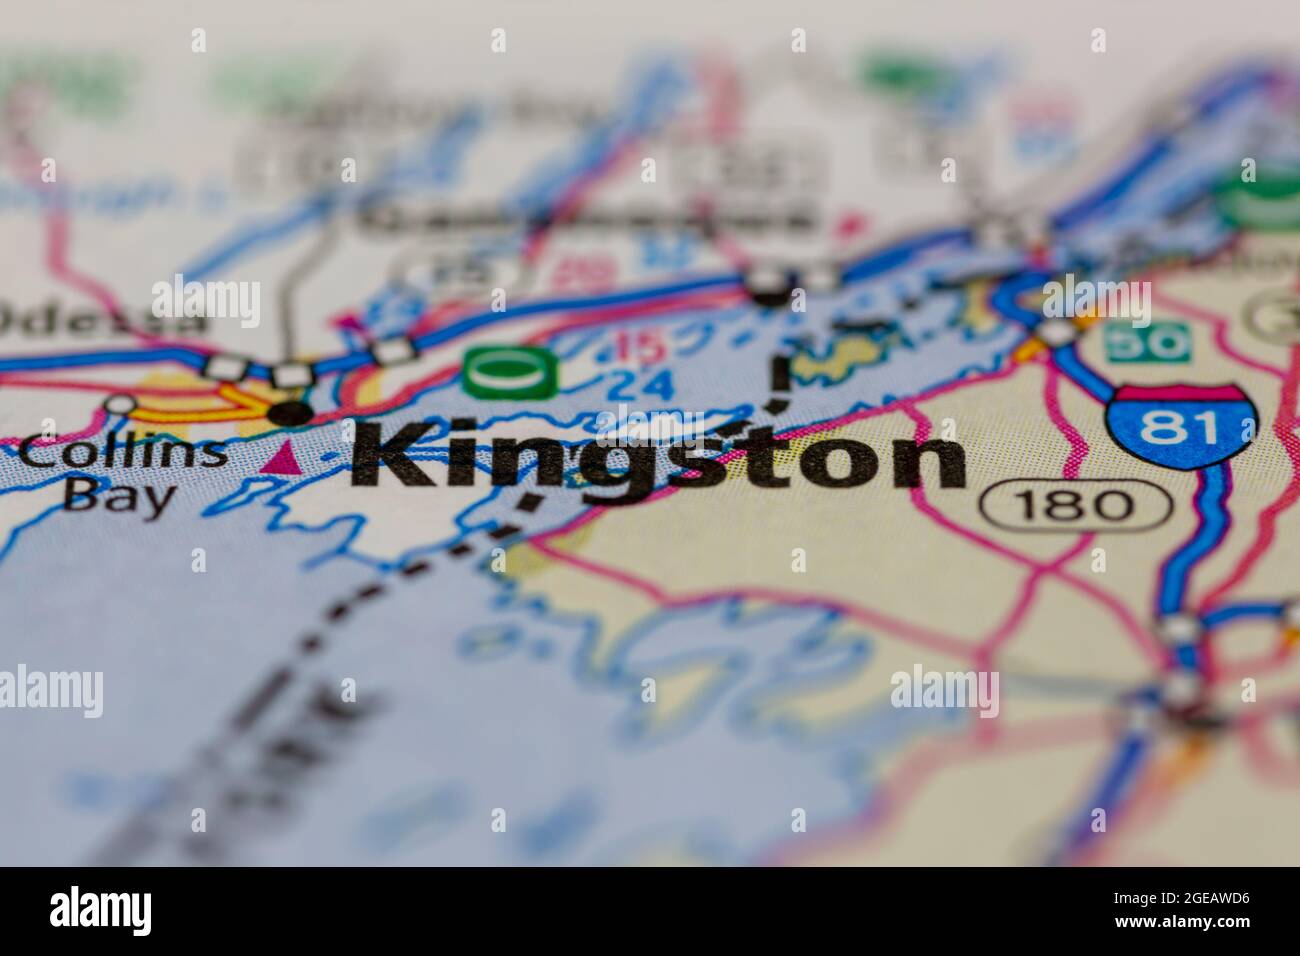 Kingston Ontario Canada shown on a road map or Geography map Stock Photo